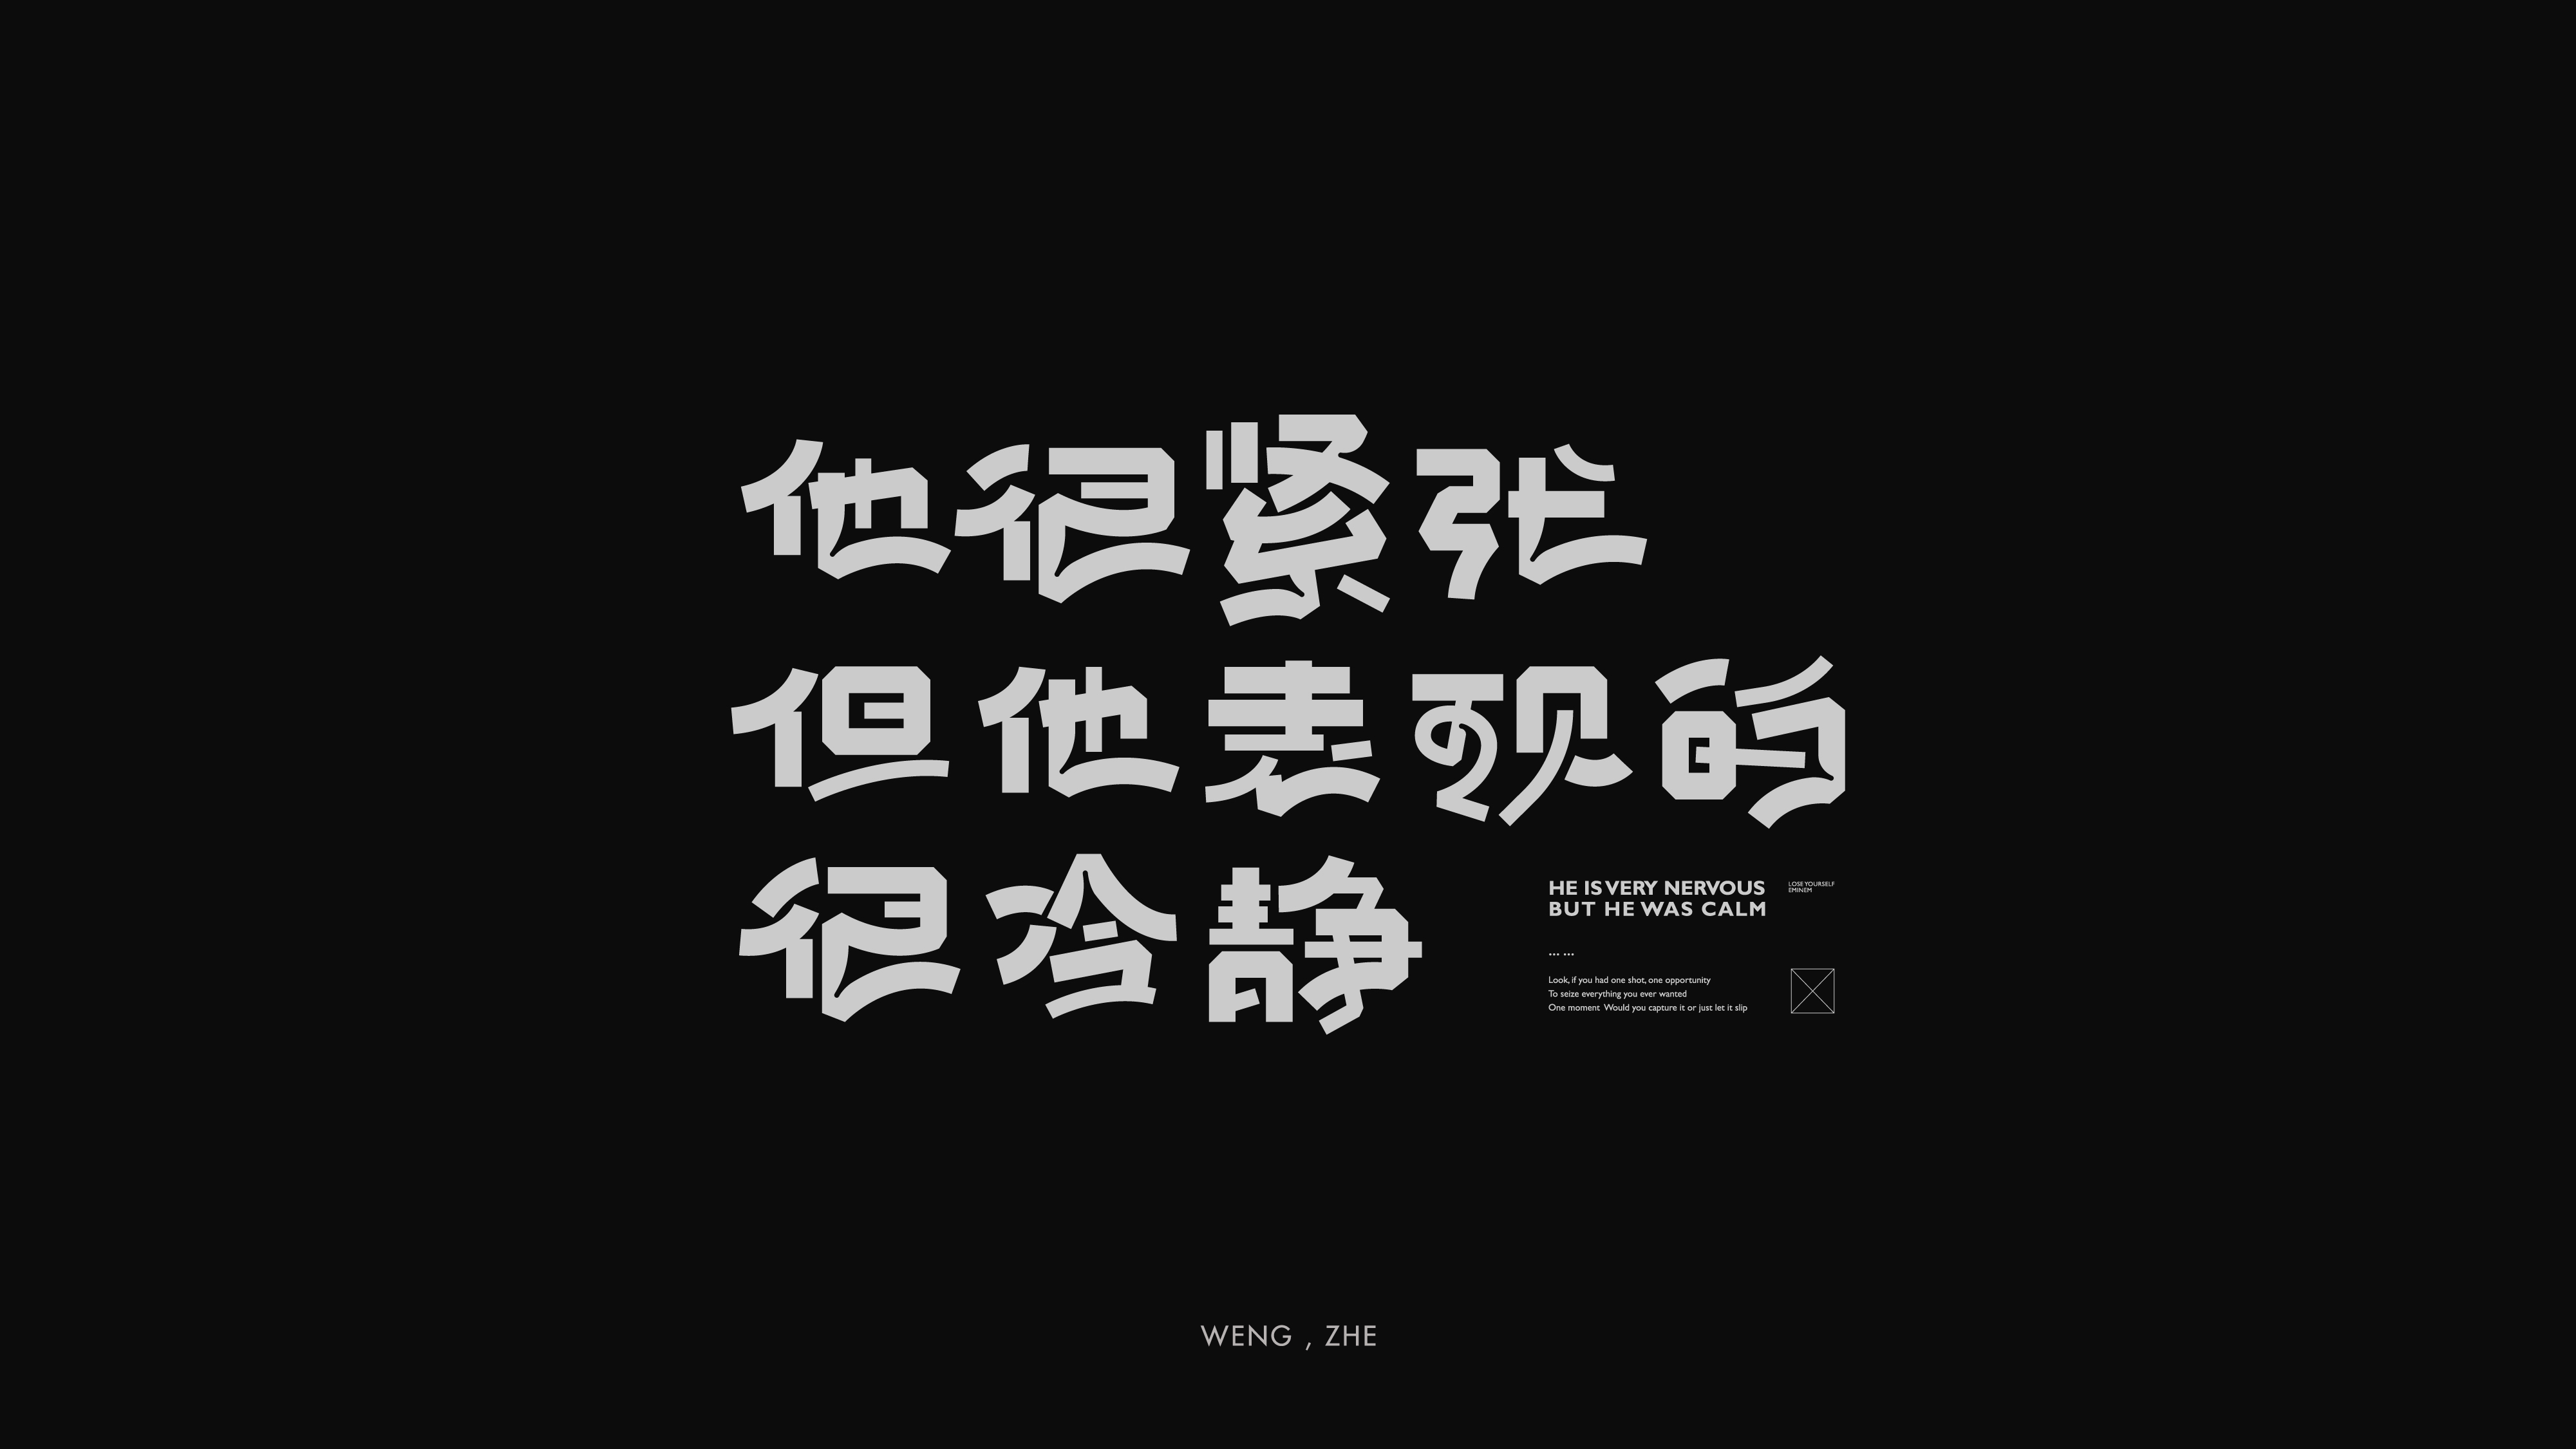 Interesting Chinese Creative Font Design-Some inspirational statements